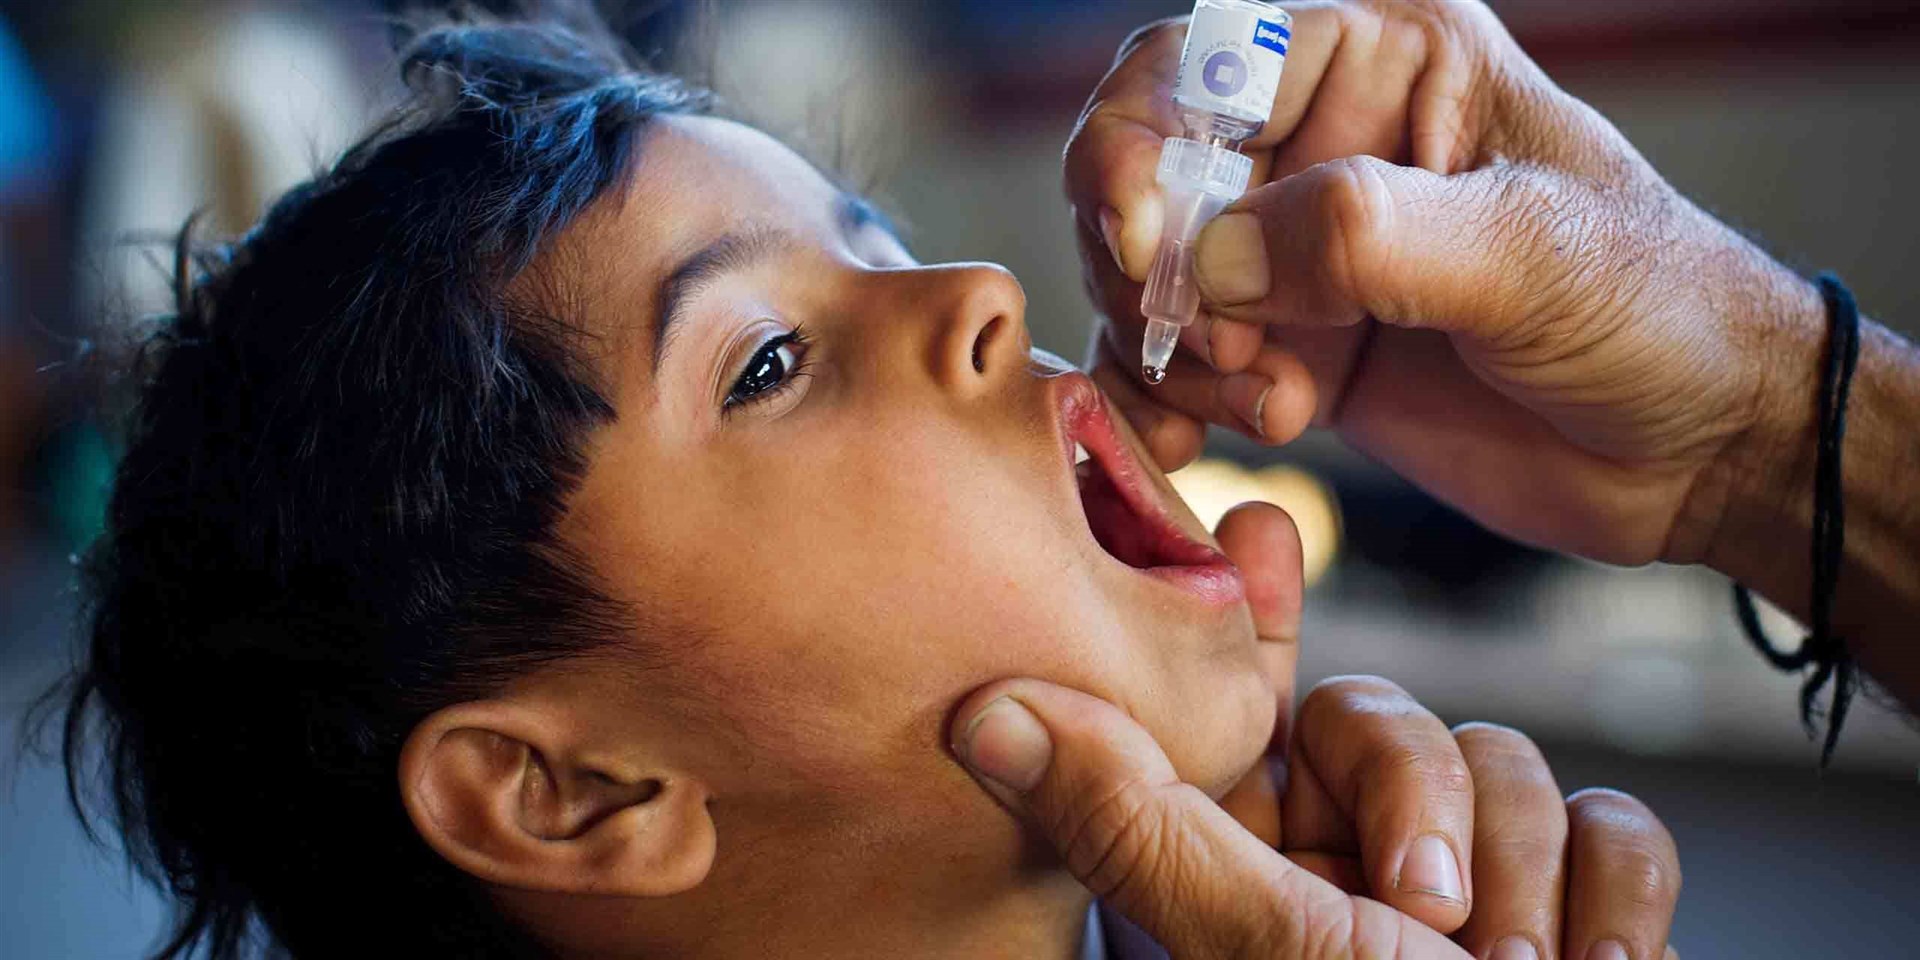 The Rotary Clubs focus on polio has reduced cases worldwide.